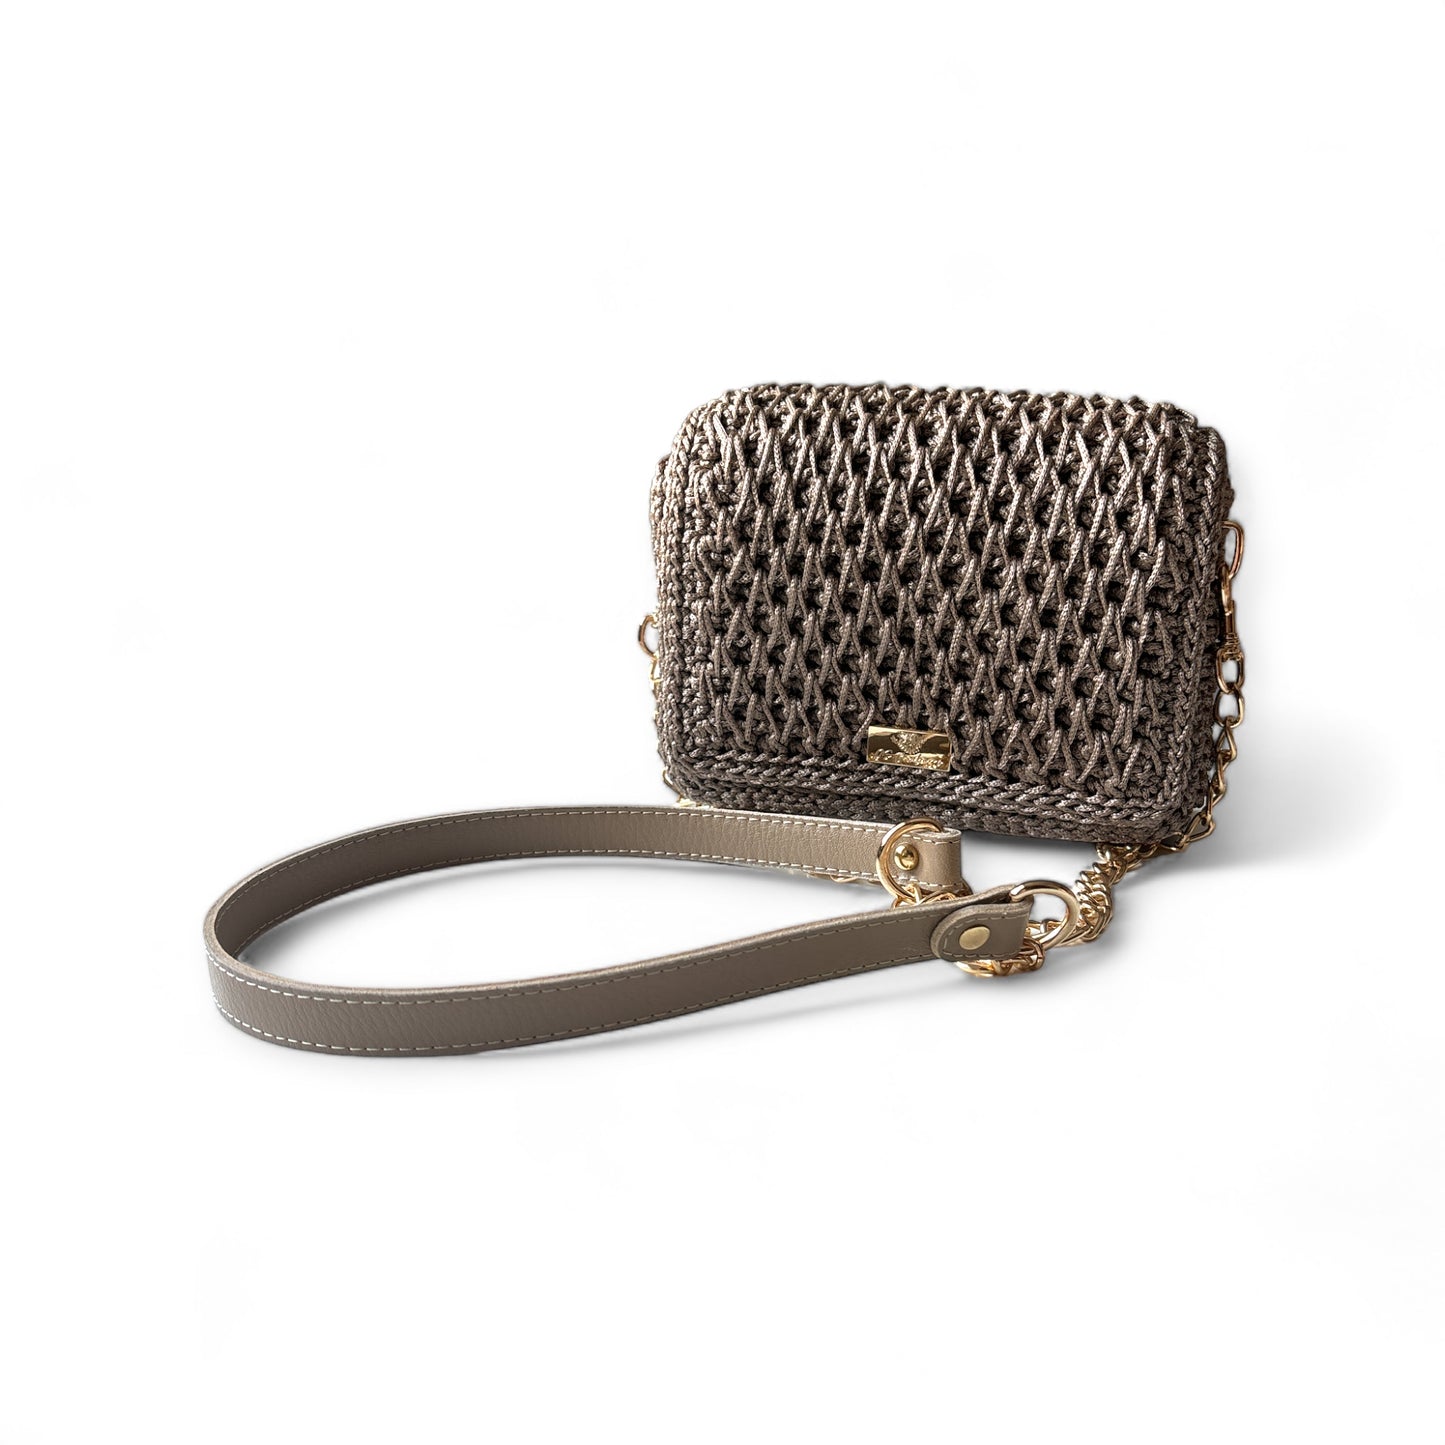 Mini - Chic handbag to spark your outfit